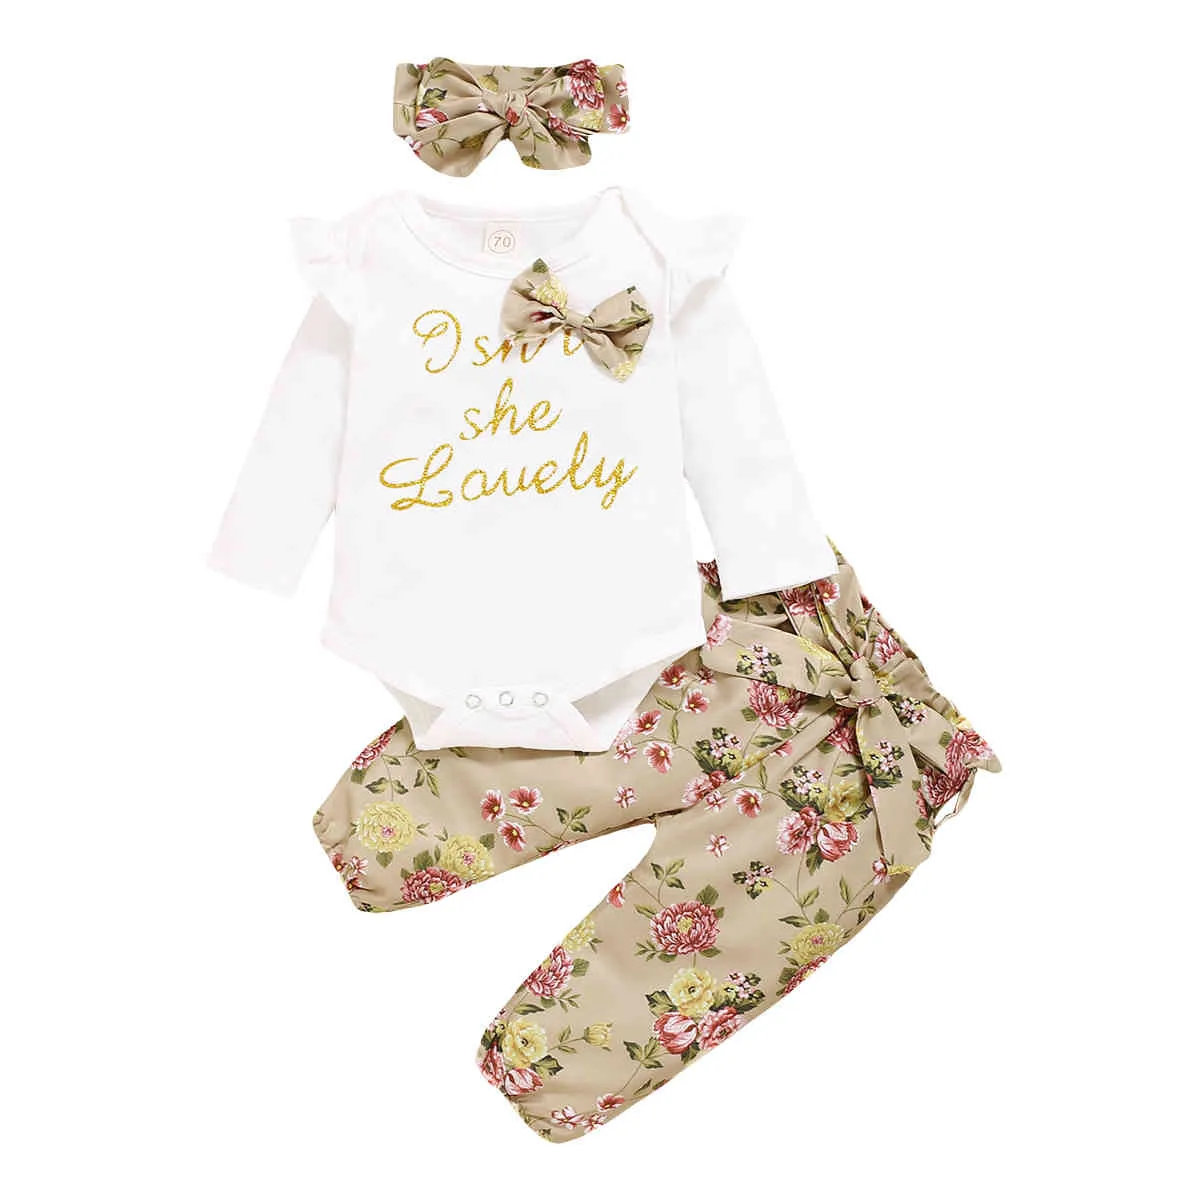 0-18M born Infant Baby Girl Flower Clothes Set Autumn Winter Long Sleeve Romper Floral Pants Headband Outfits Costumes 210515